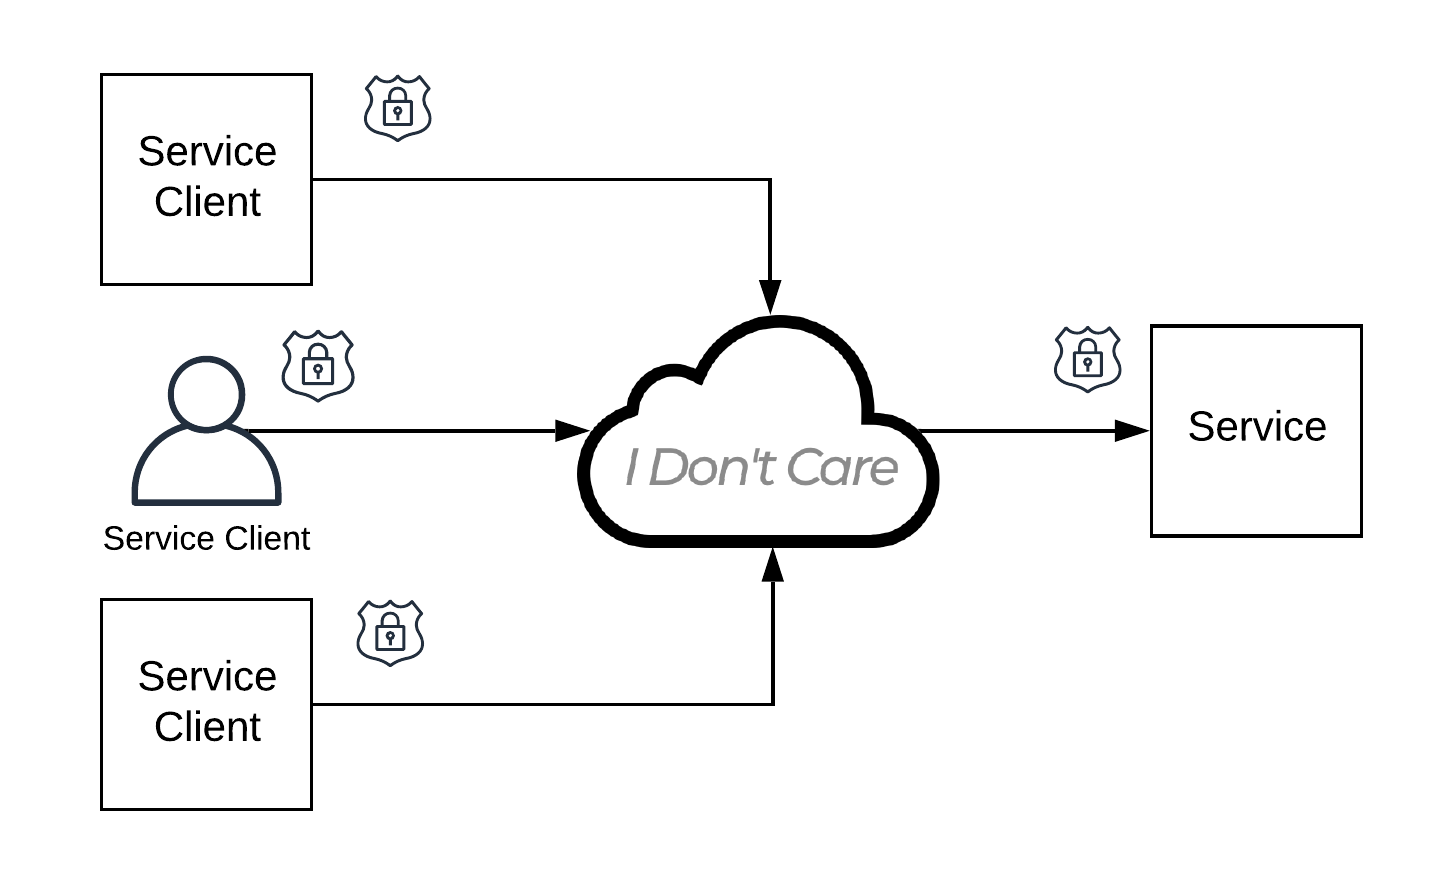 A Secure, Uncaring Network Architecture